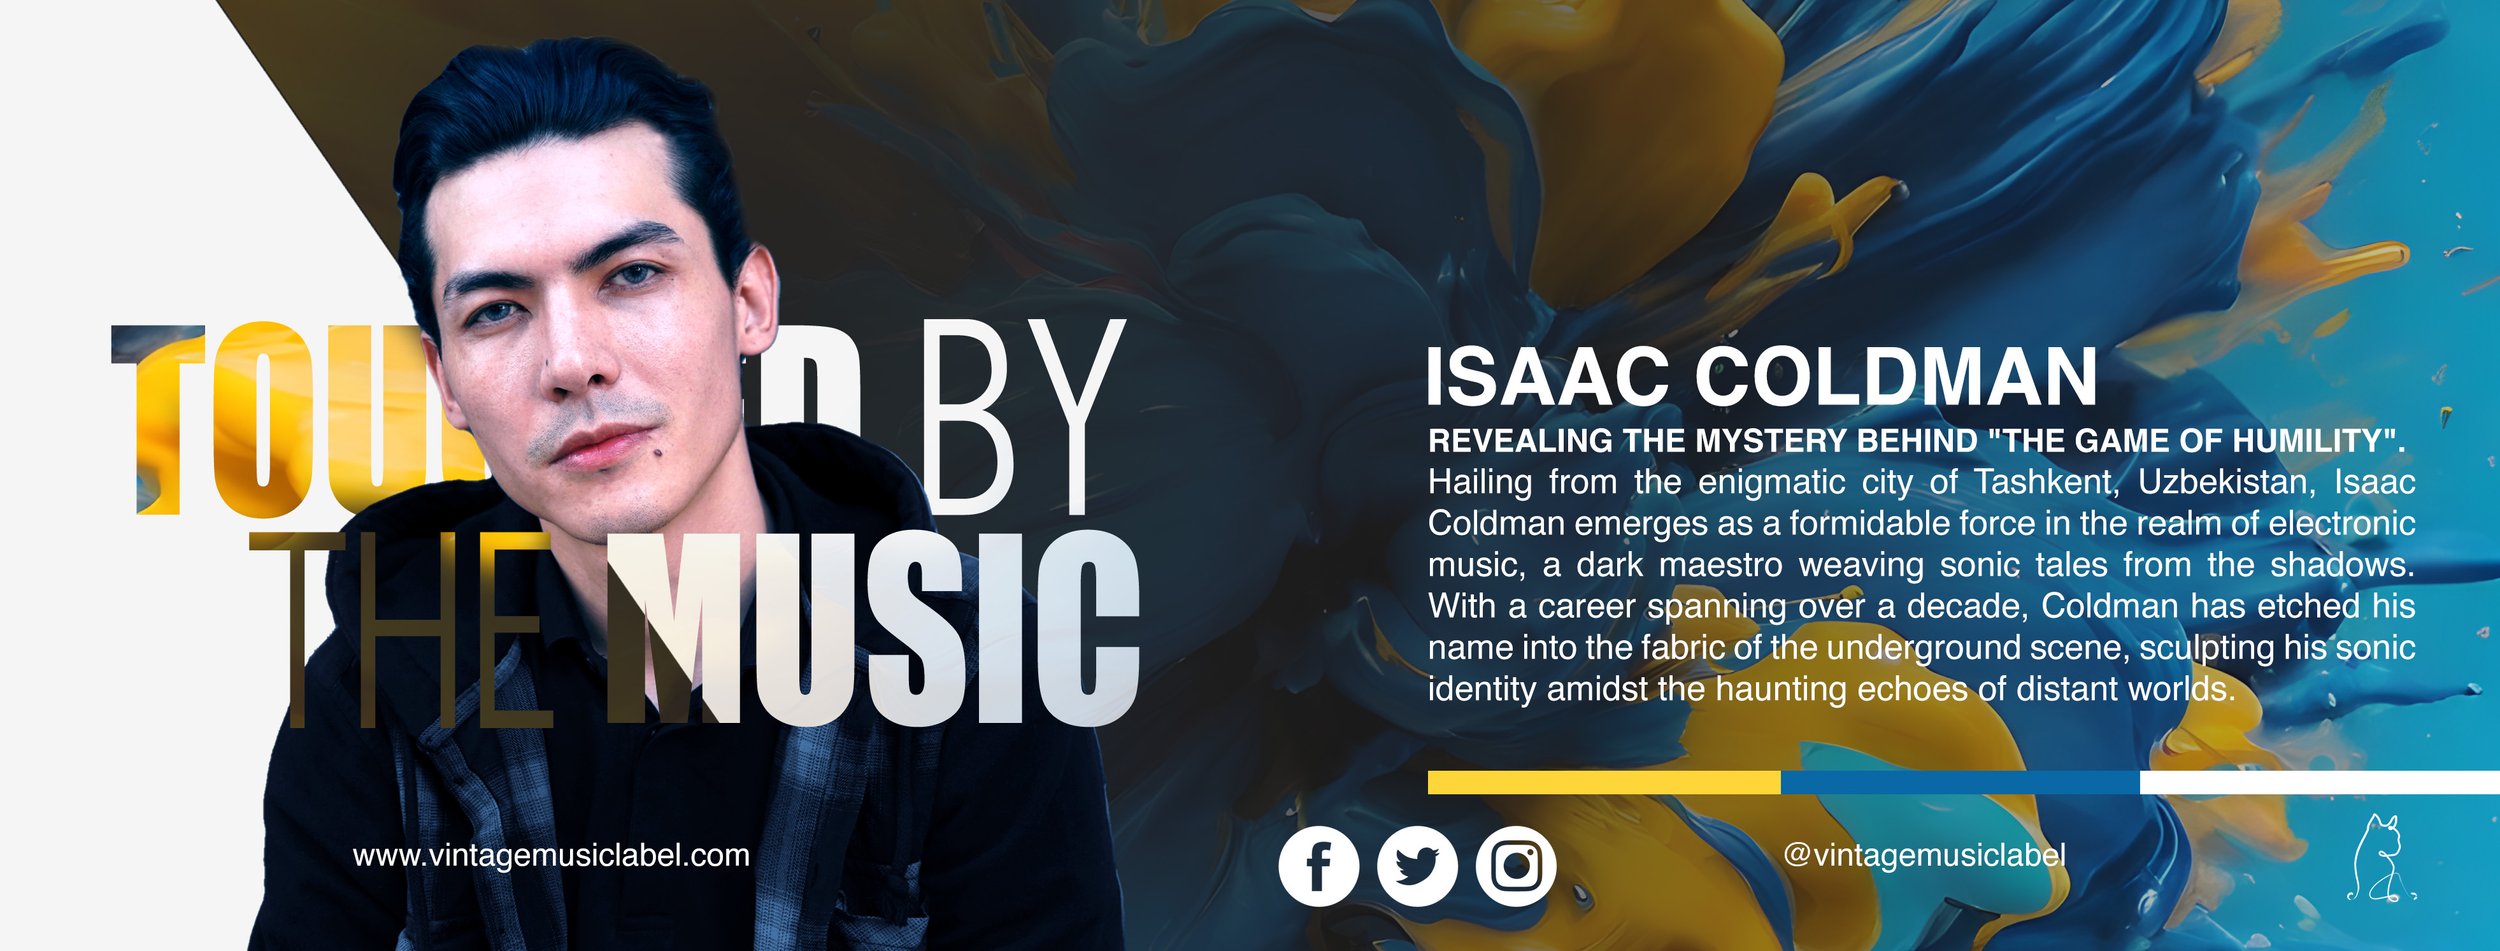 BANNER_BLOG-TOUCHED_BY_THE_MUSIC_ISAAC_COLDMAN.jpg